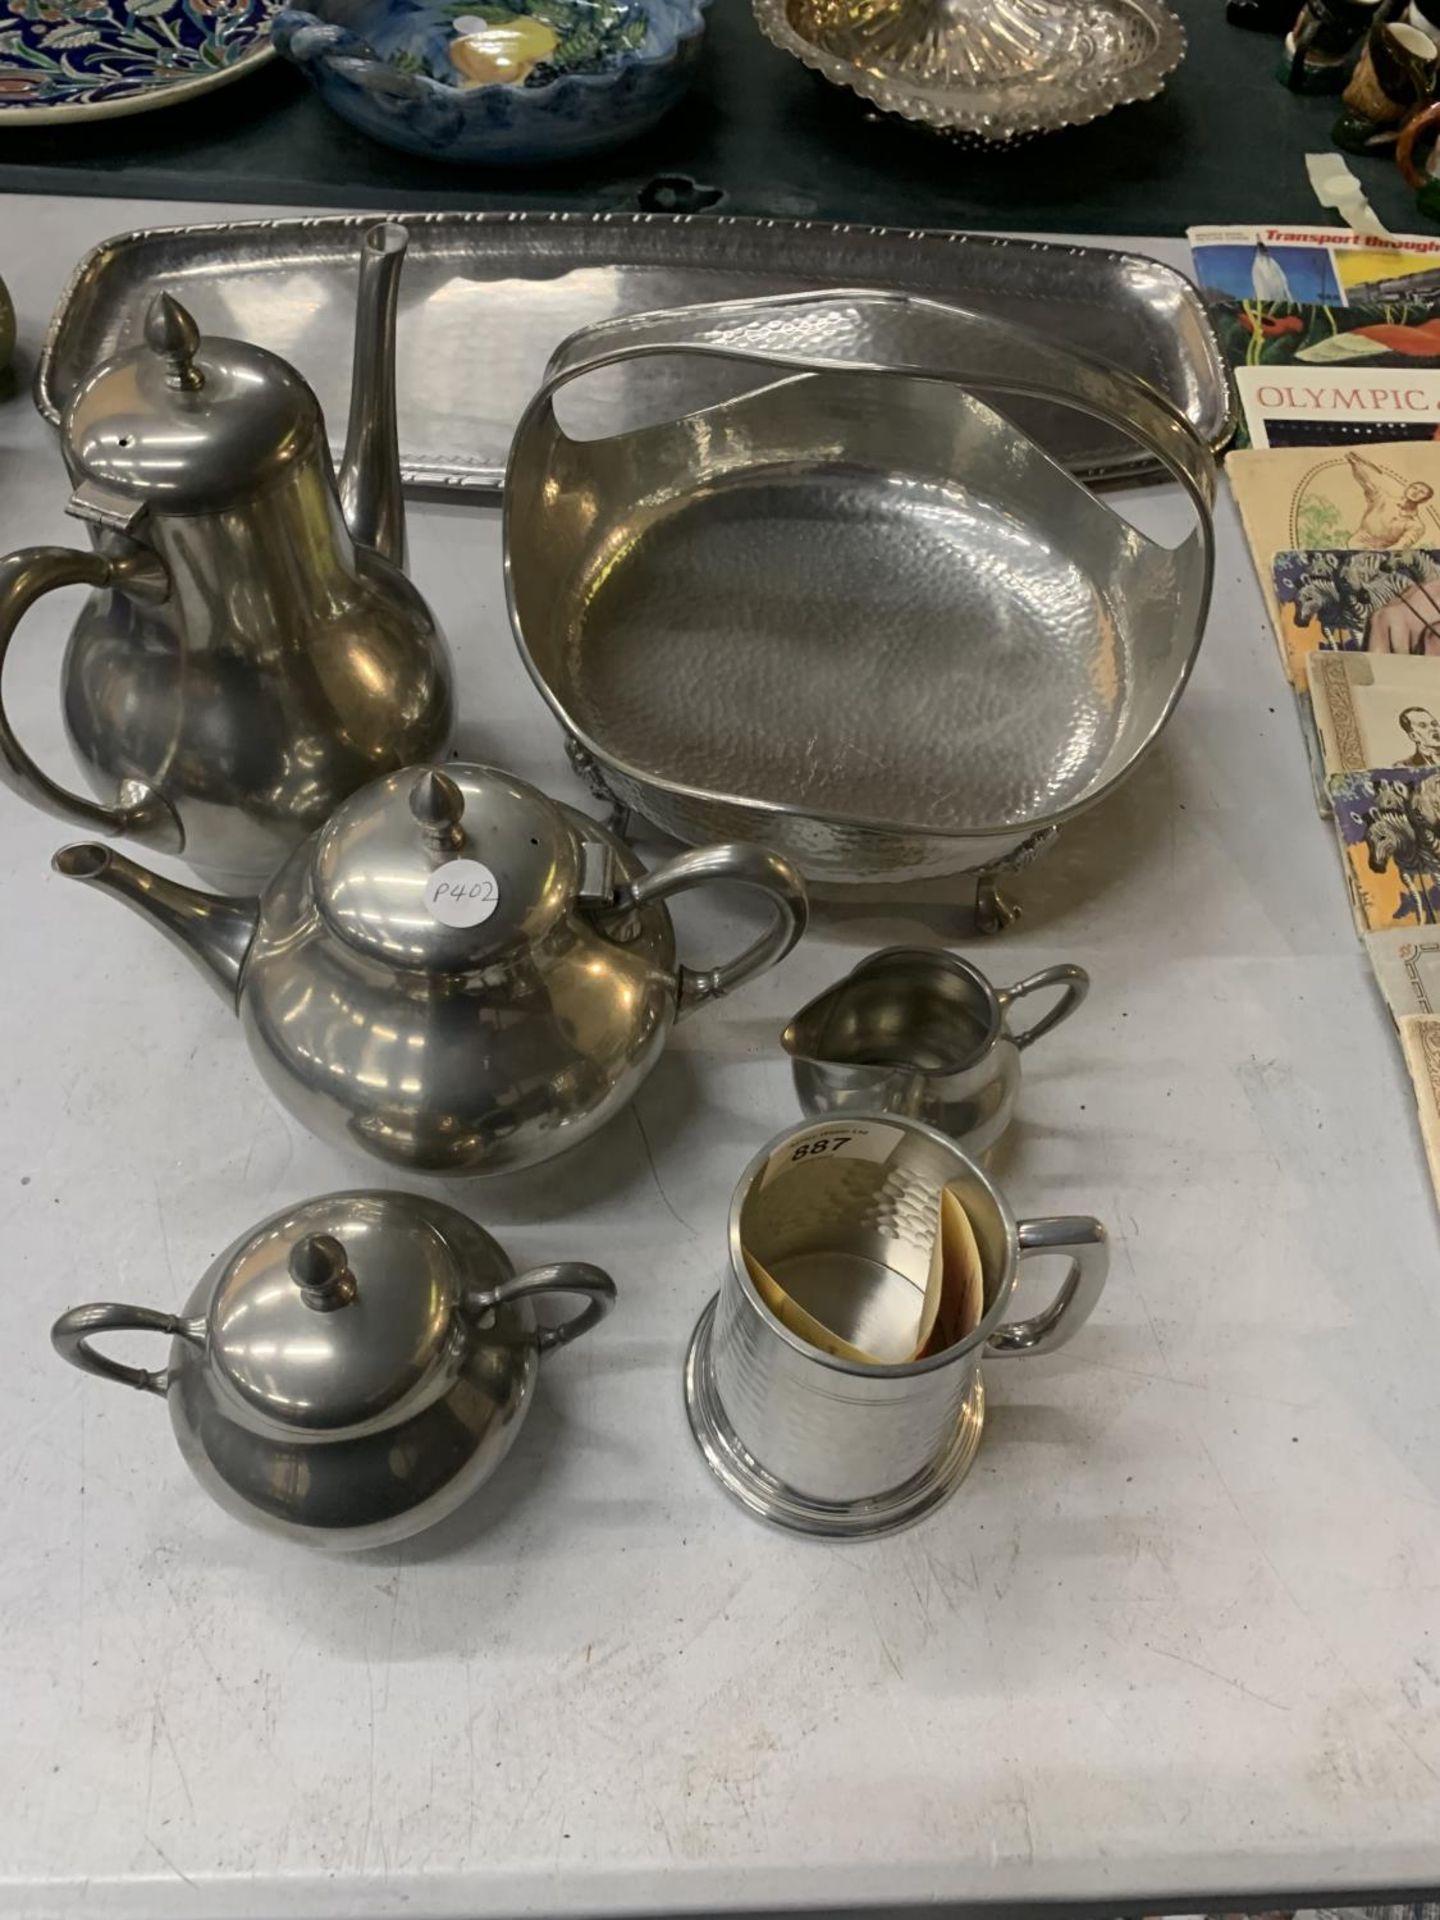 A PEWTER TEASET TO INCLUDE A TEAPOT, HOT WATER POT, CREAM JUG, SUGAR BOWL, A TRAY, LIDDED BASKET